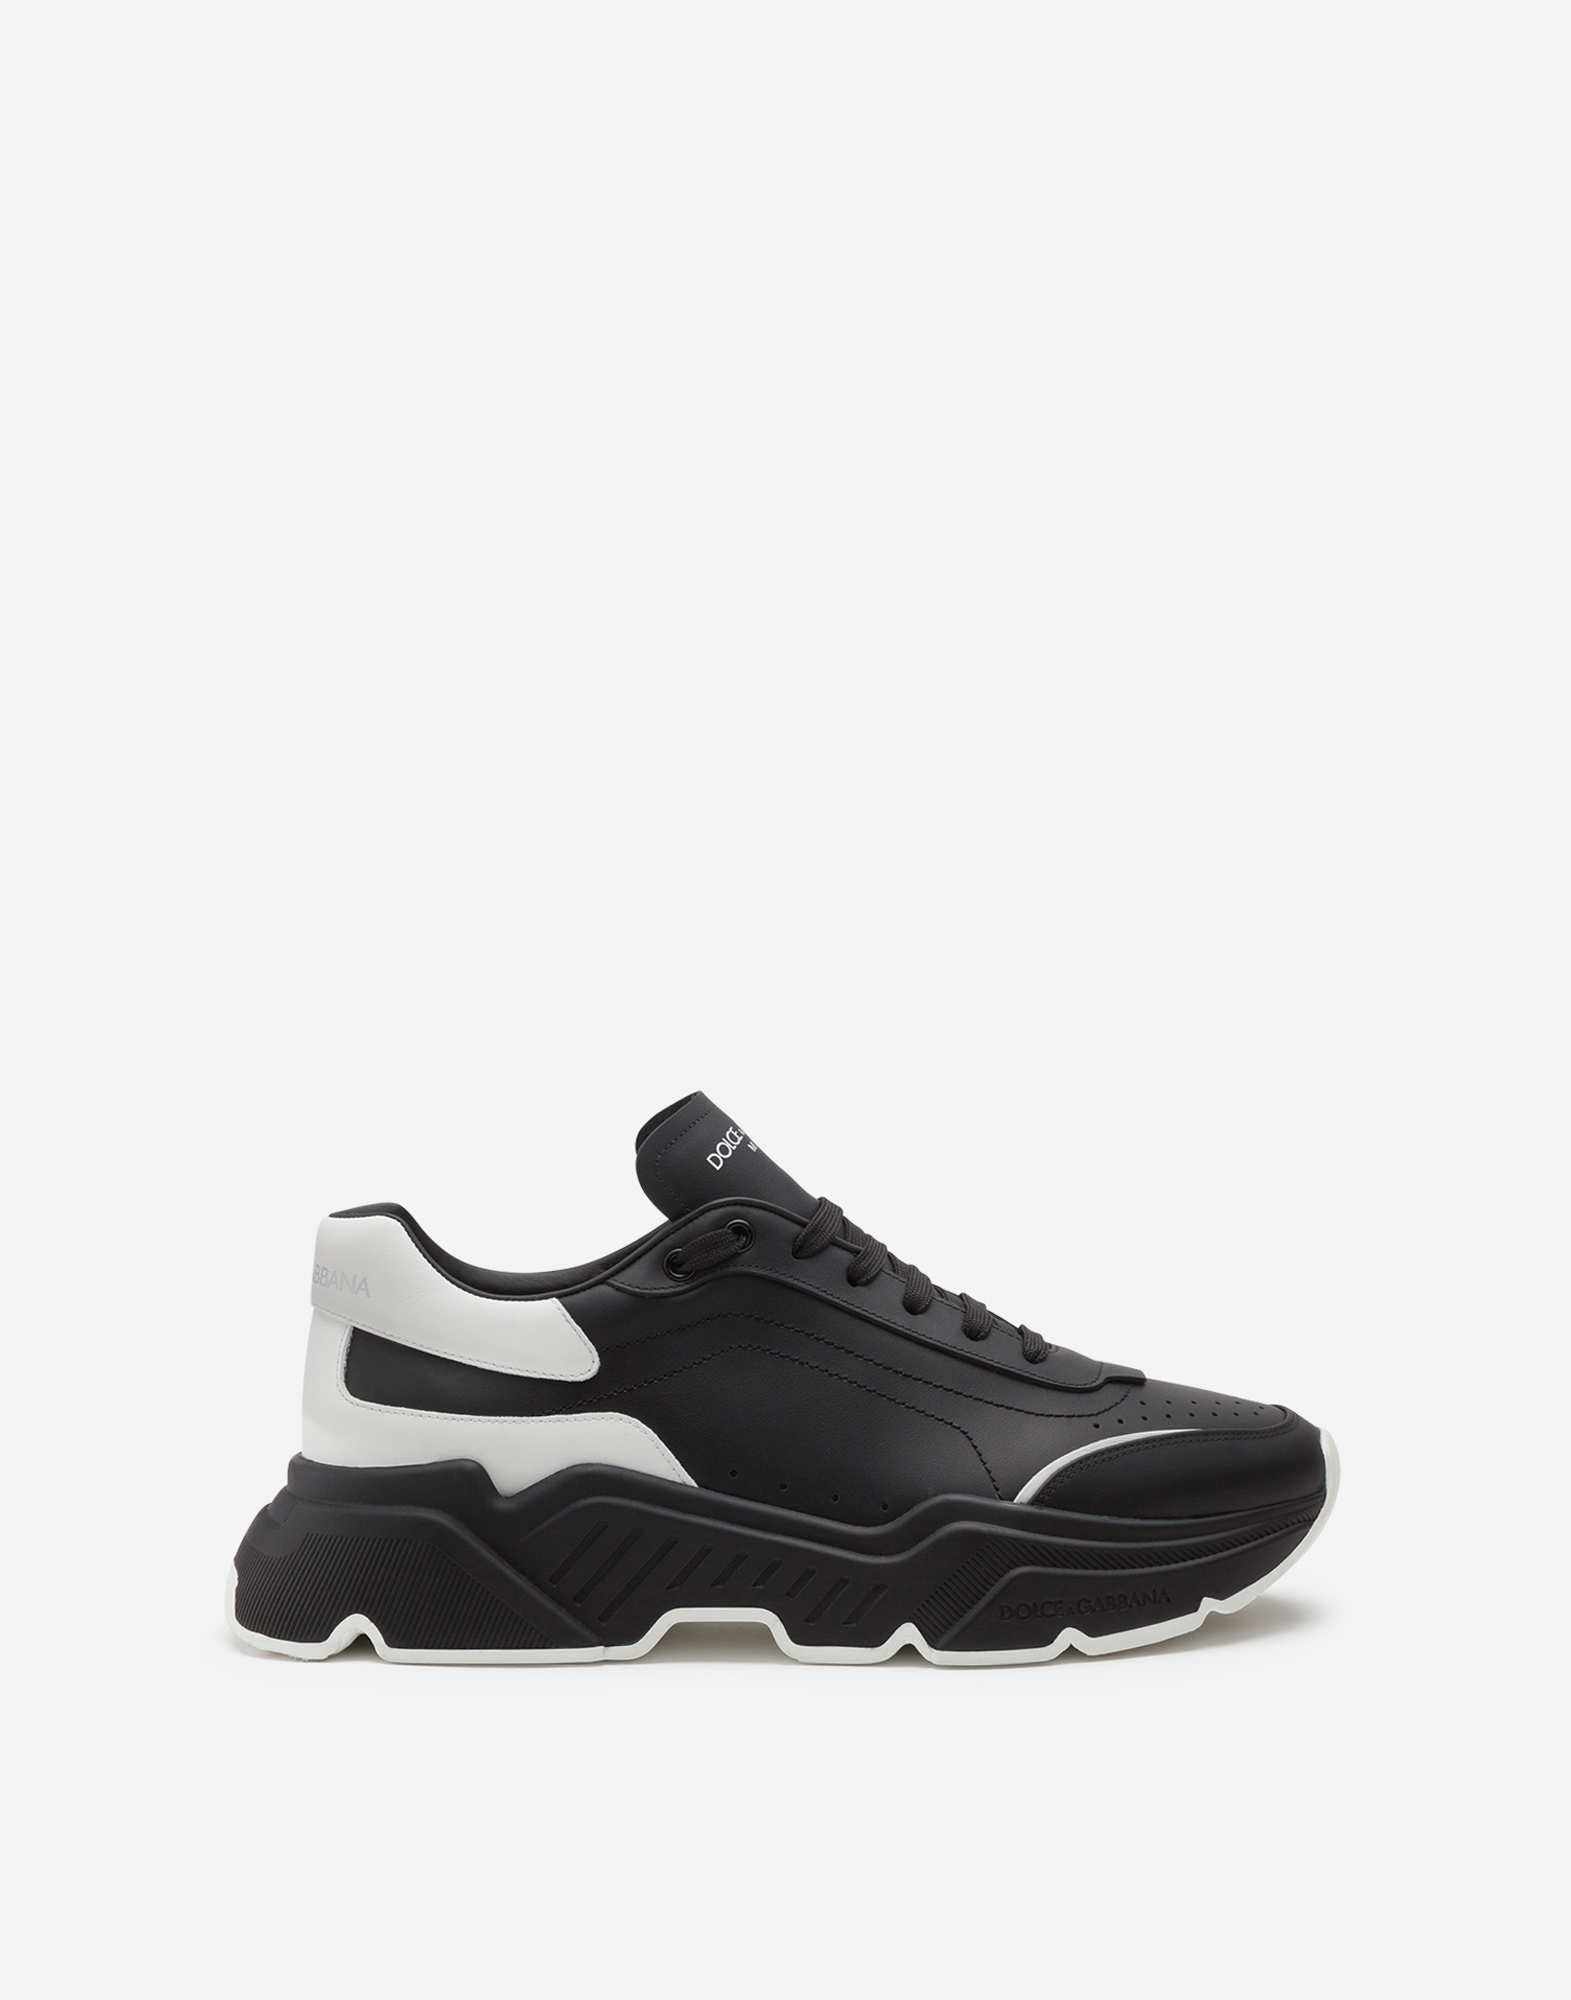 dolce and gabbana trainers black